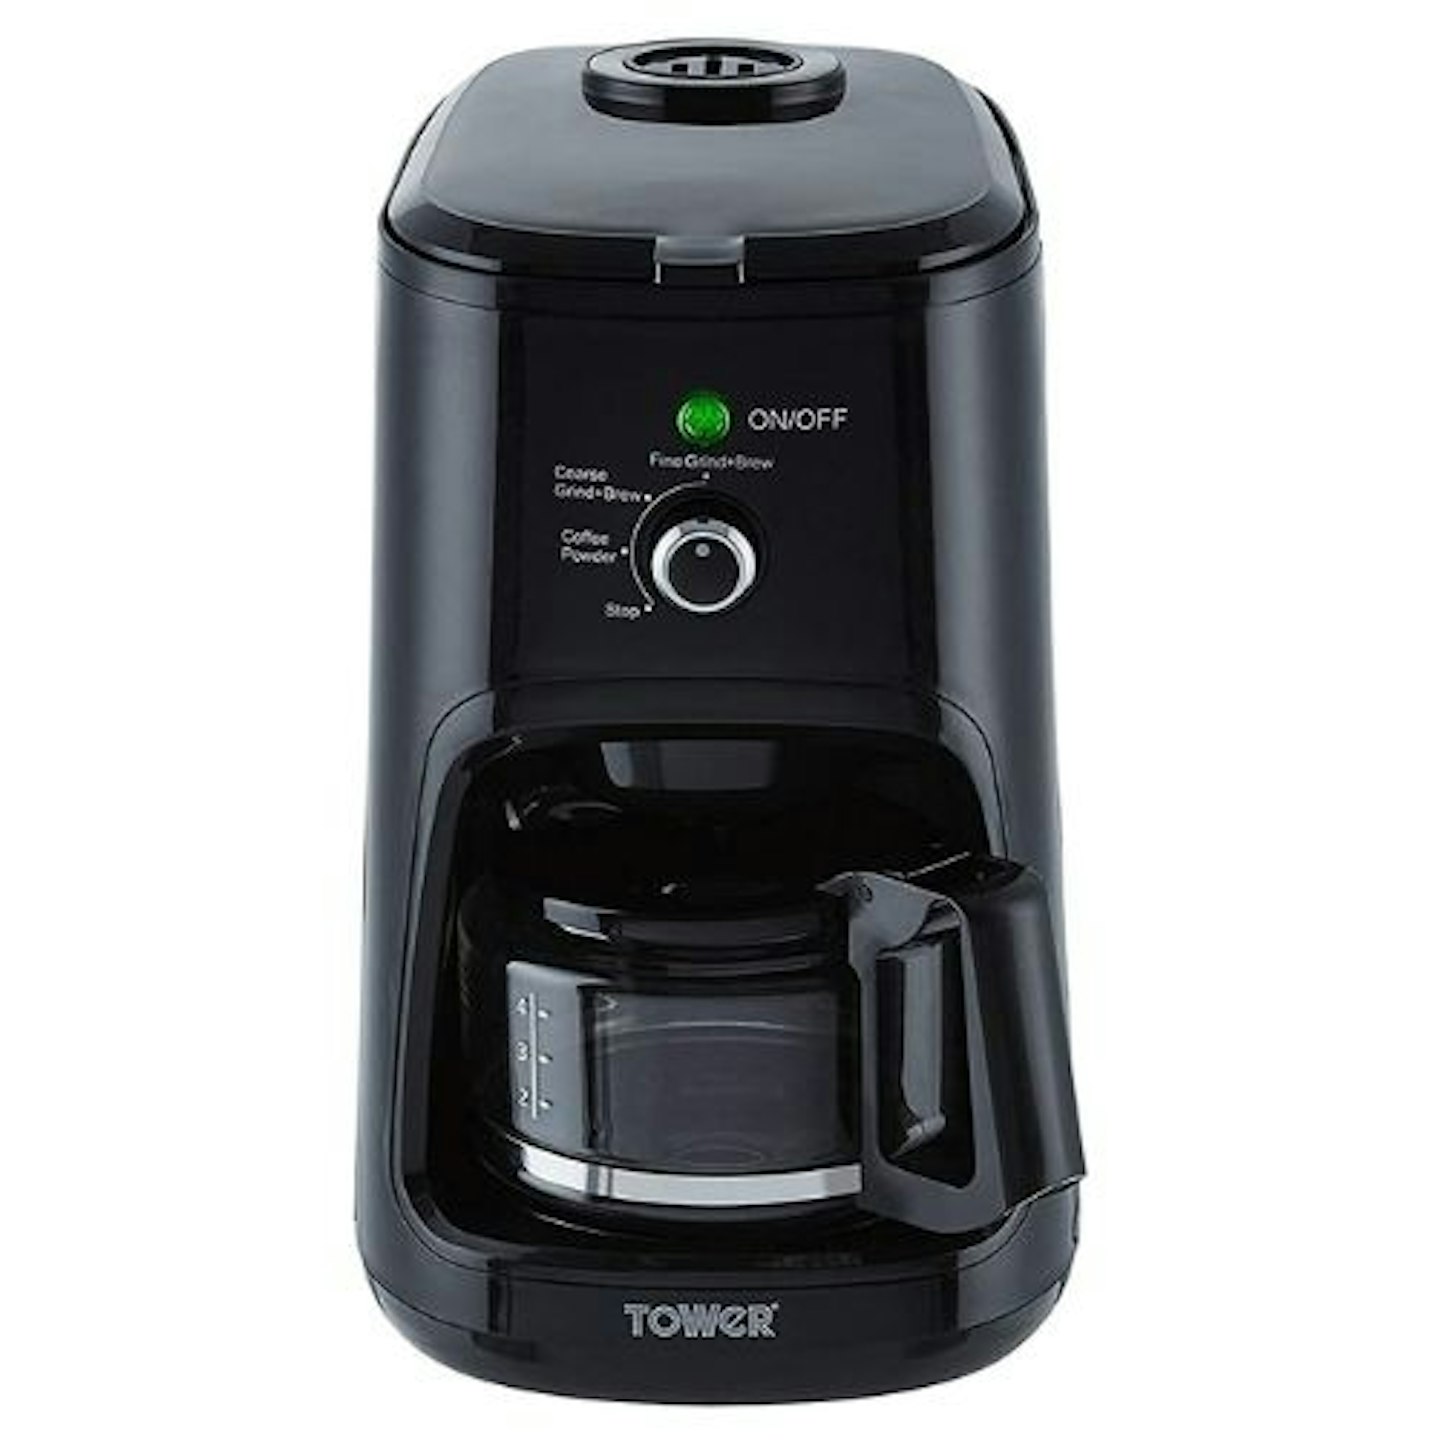 Tower T13005 Bean-to-Cup Coffee Maker